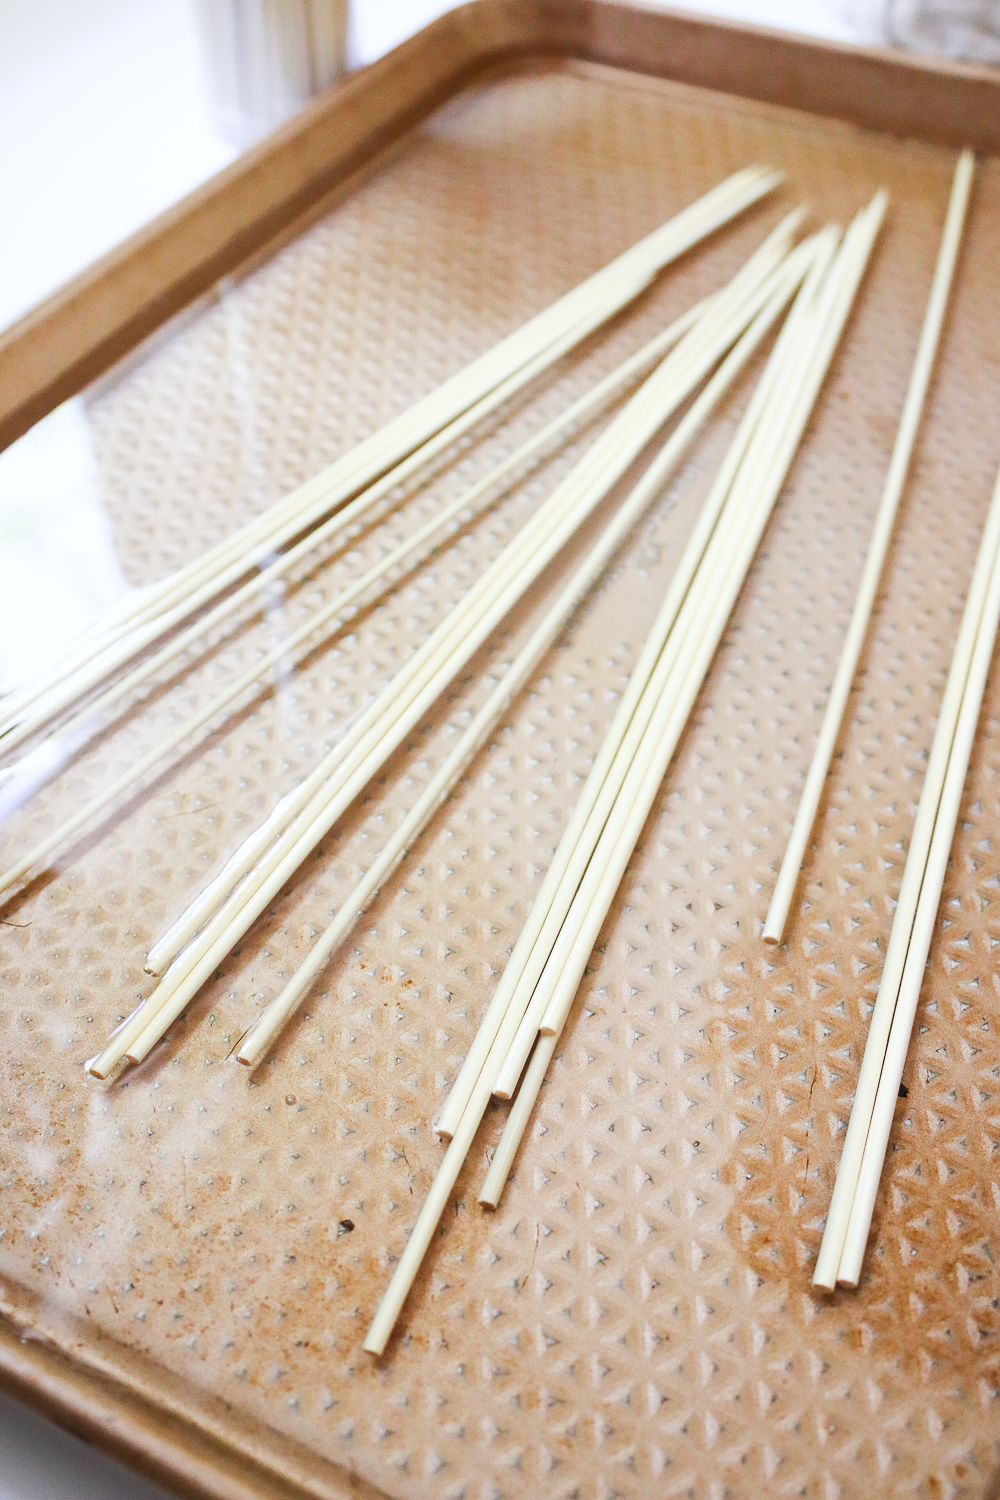 Blogger Stephanie Ziajka shows how to soak wooden skewers for grilling or baking on Diary of a Debutante